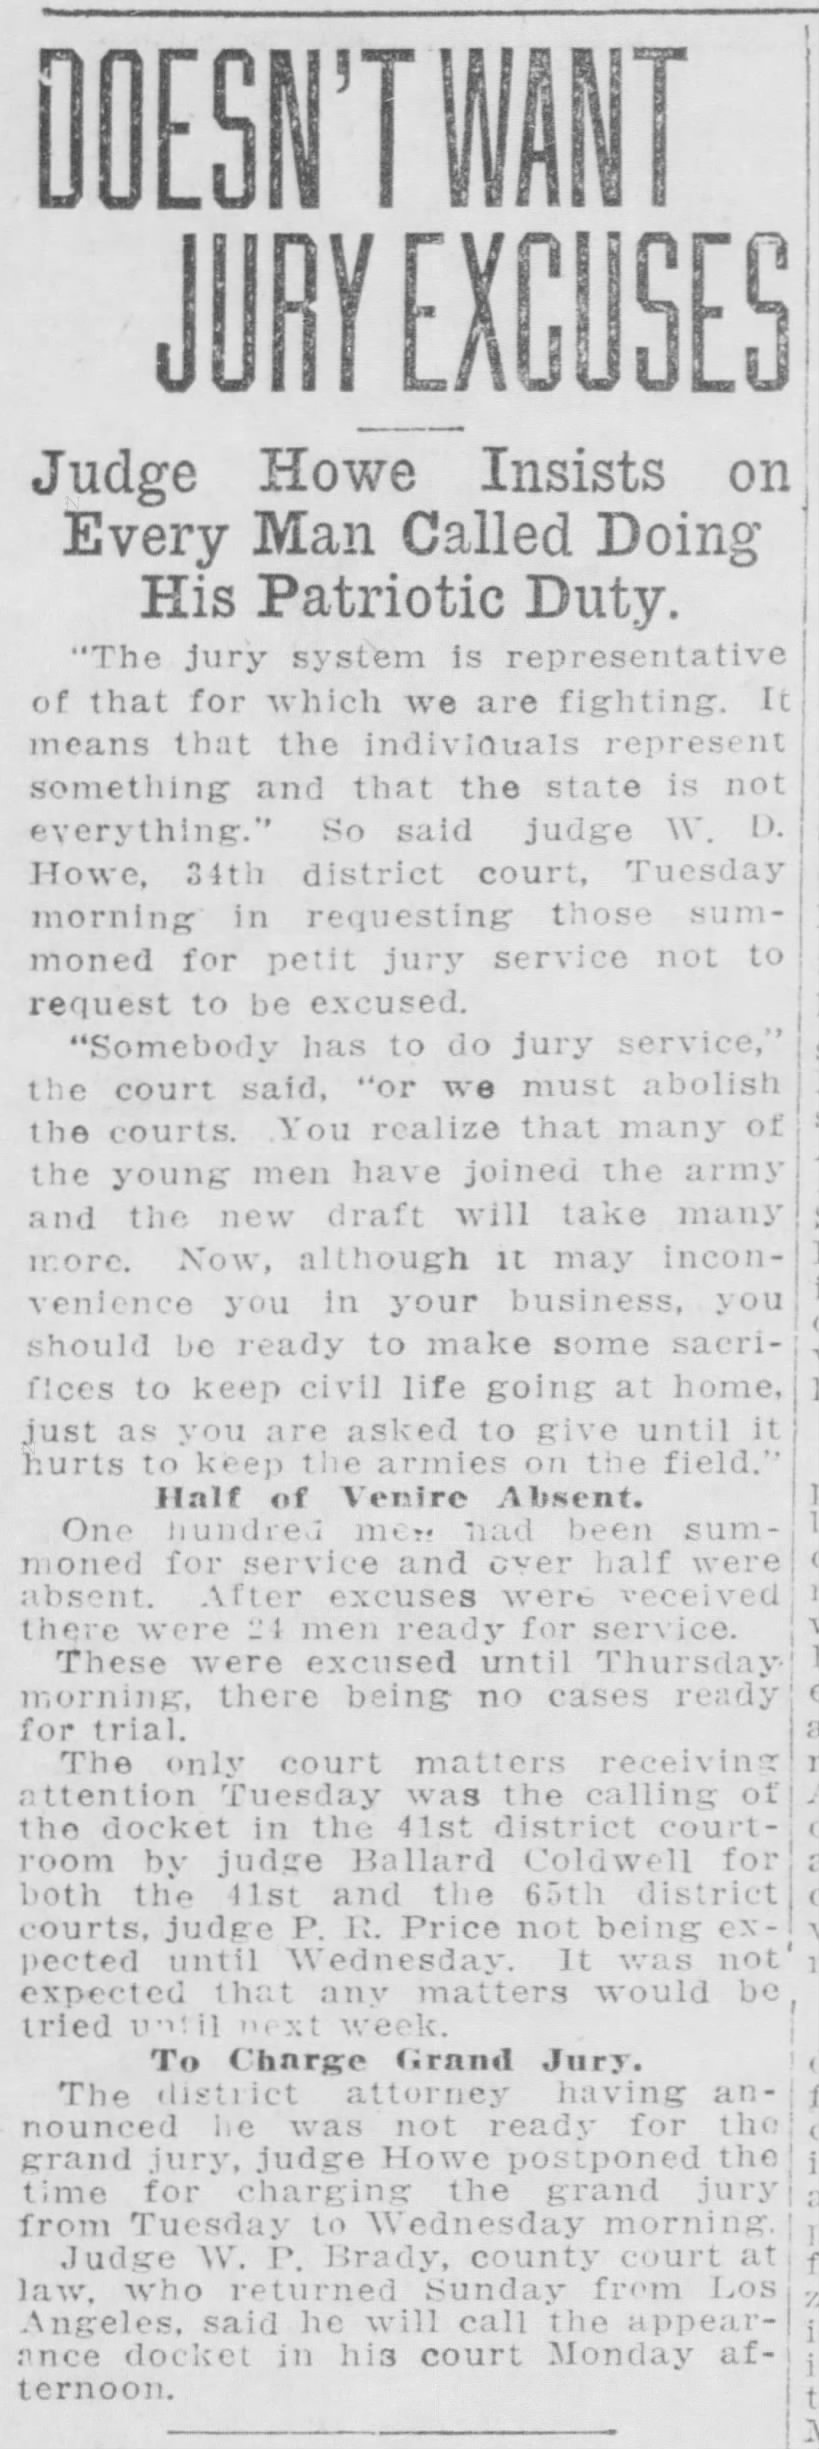 Doesn't Want Jury Excuses: Judge Howe Insists on Every Man Called Doing His Patriotic Duty